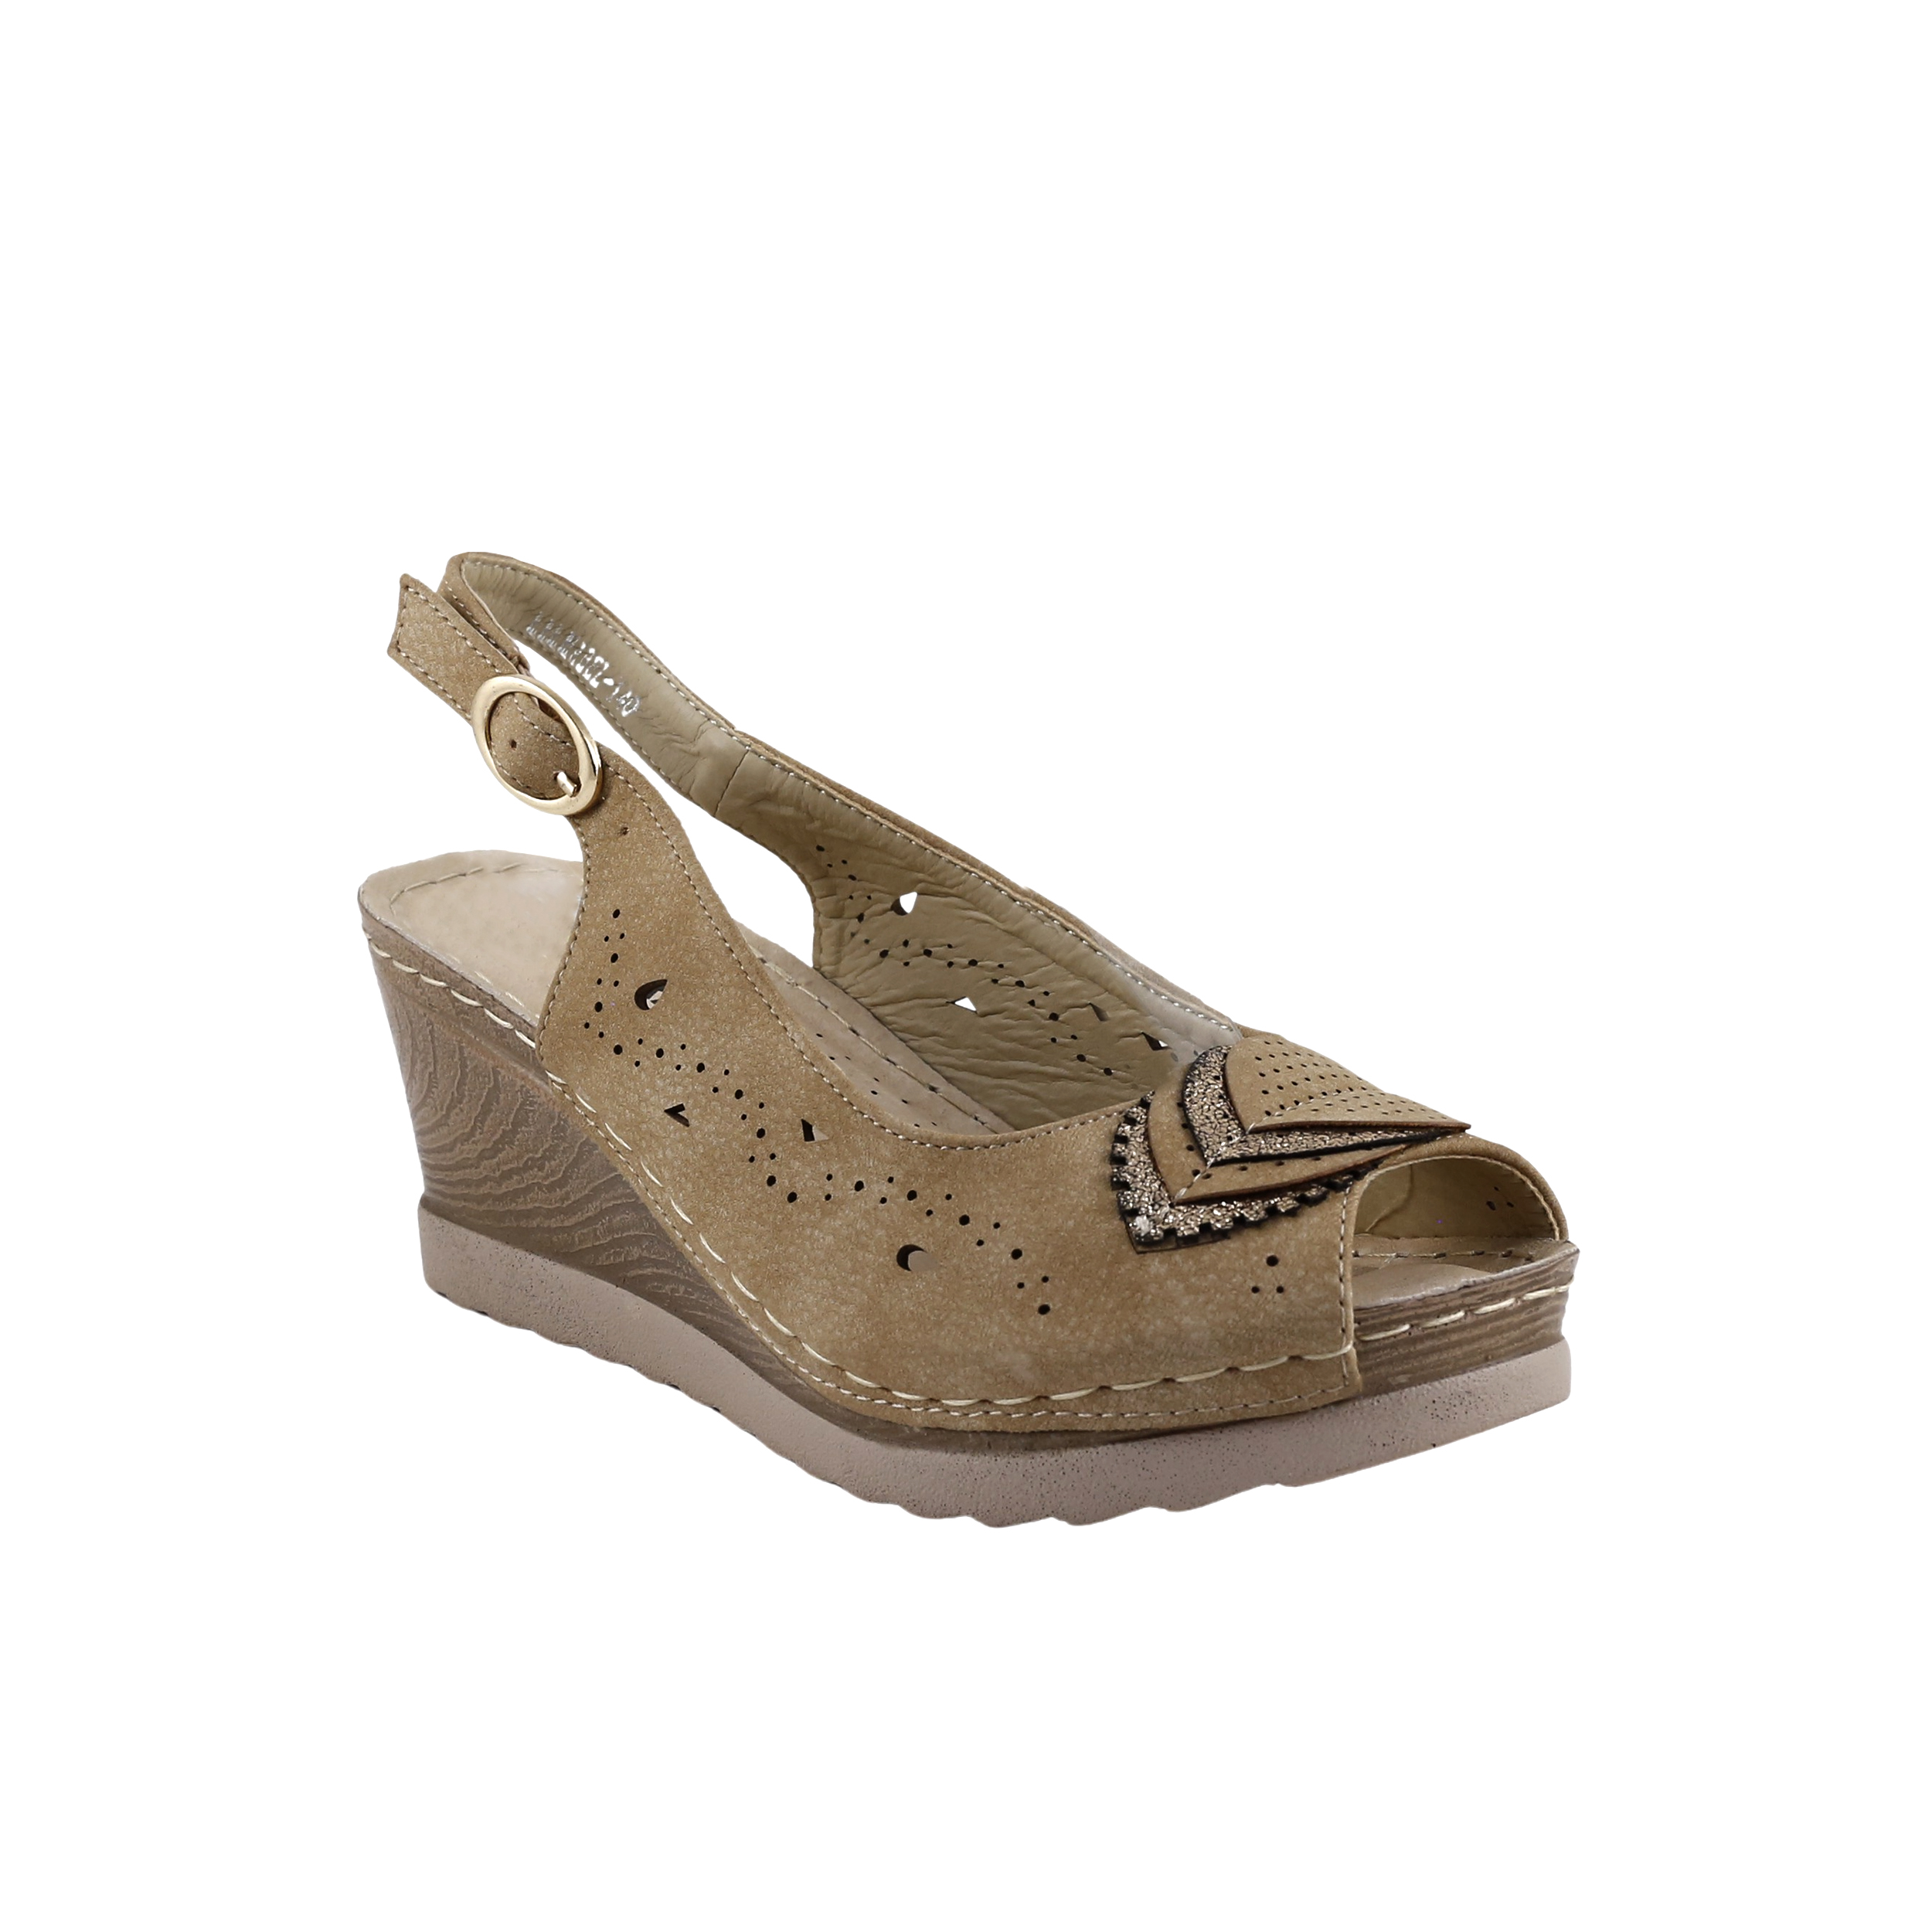 Woman Shoes Sandals - Flip Flops Taupe sandal with gold leaf